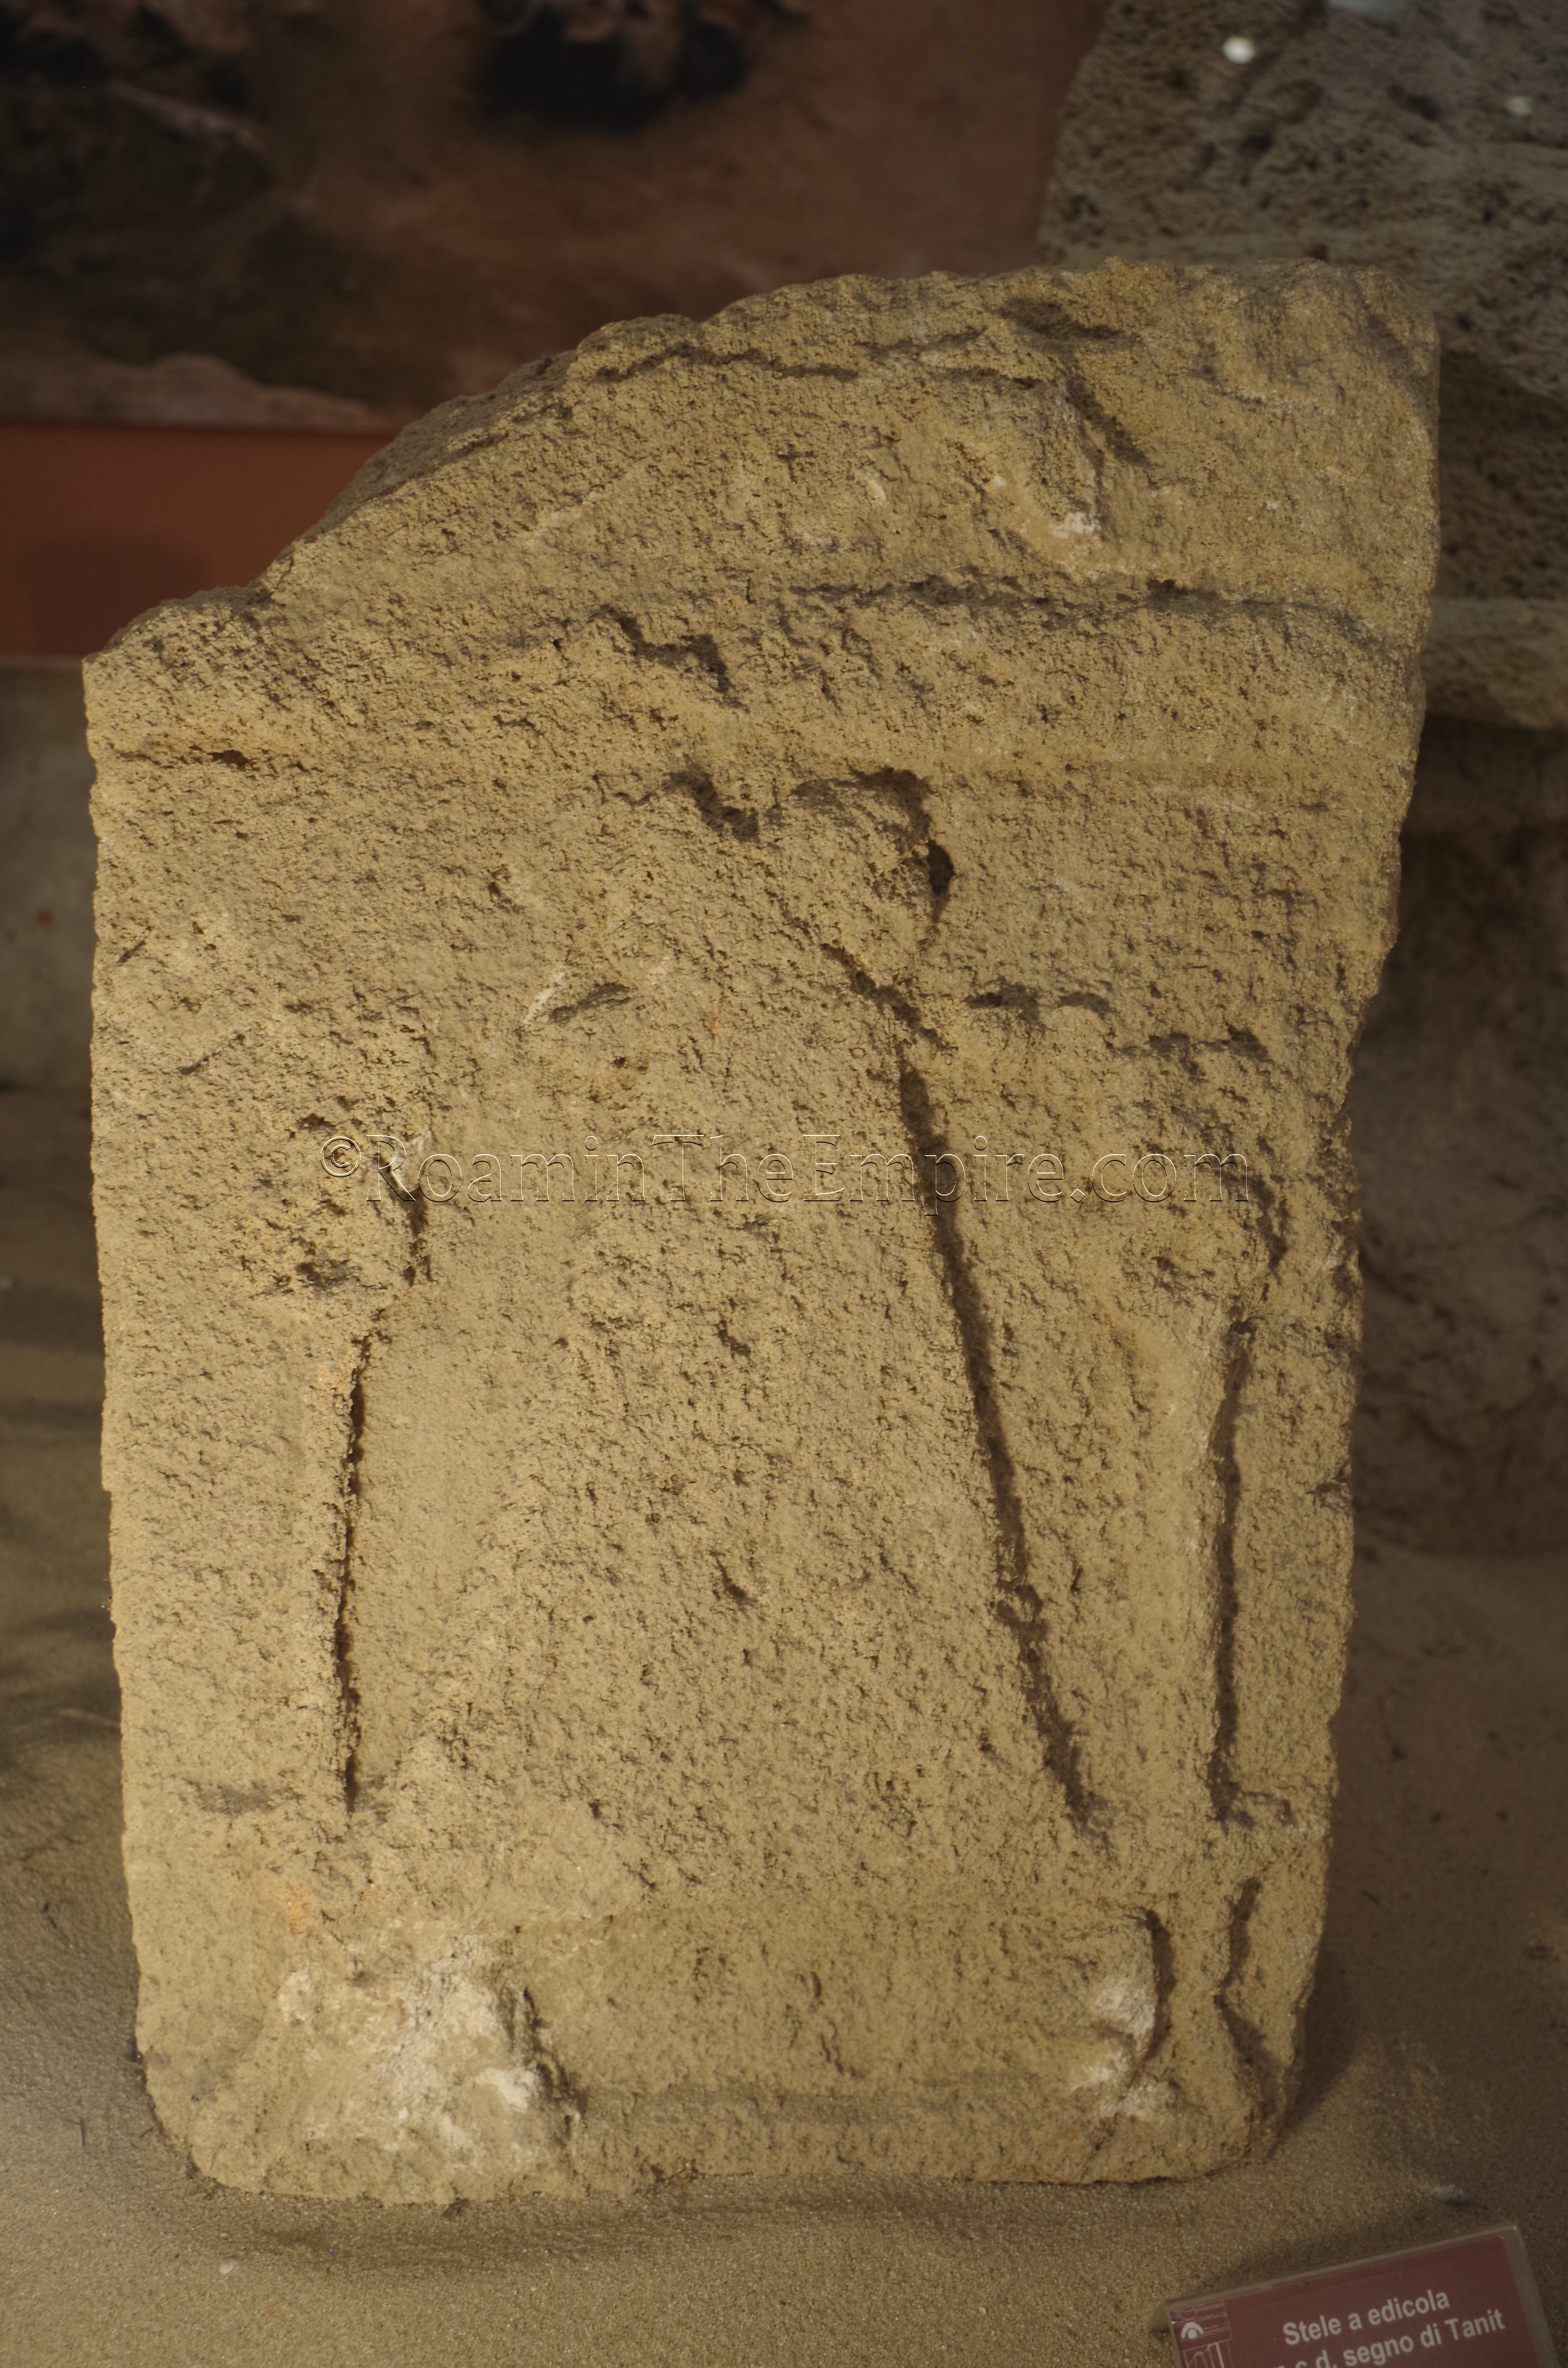 Stele with the symbol of Tanit from the Punic tophet at Tharros. Displayed in the Museo Civico Giovanni Marongiu.